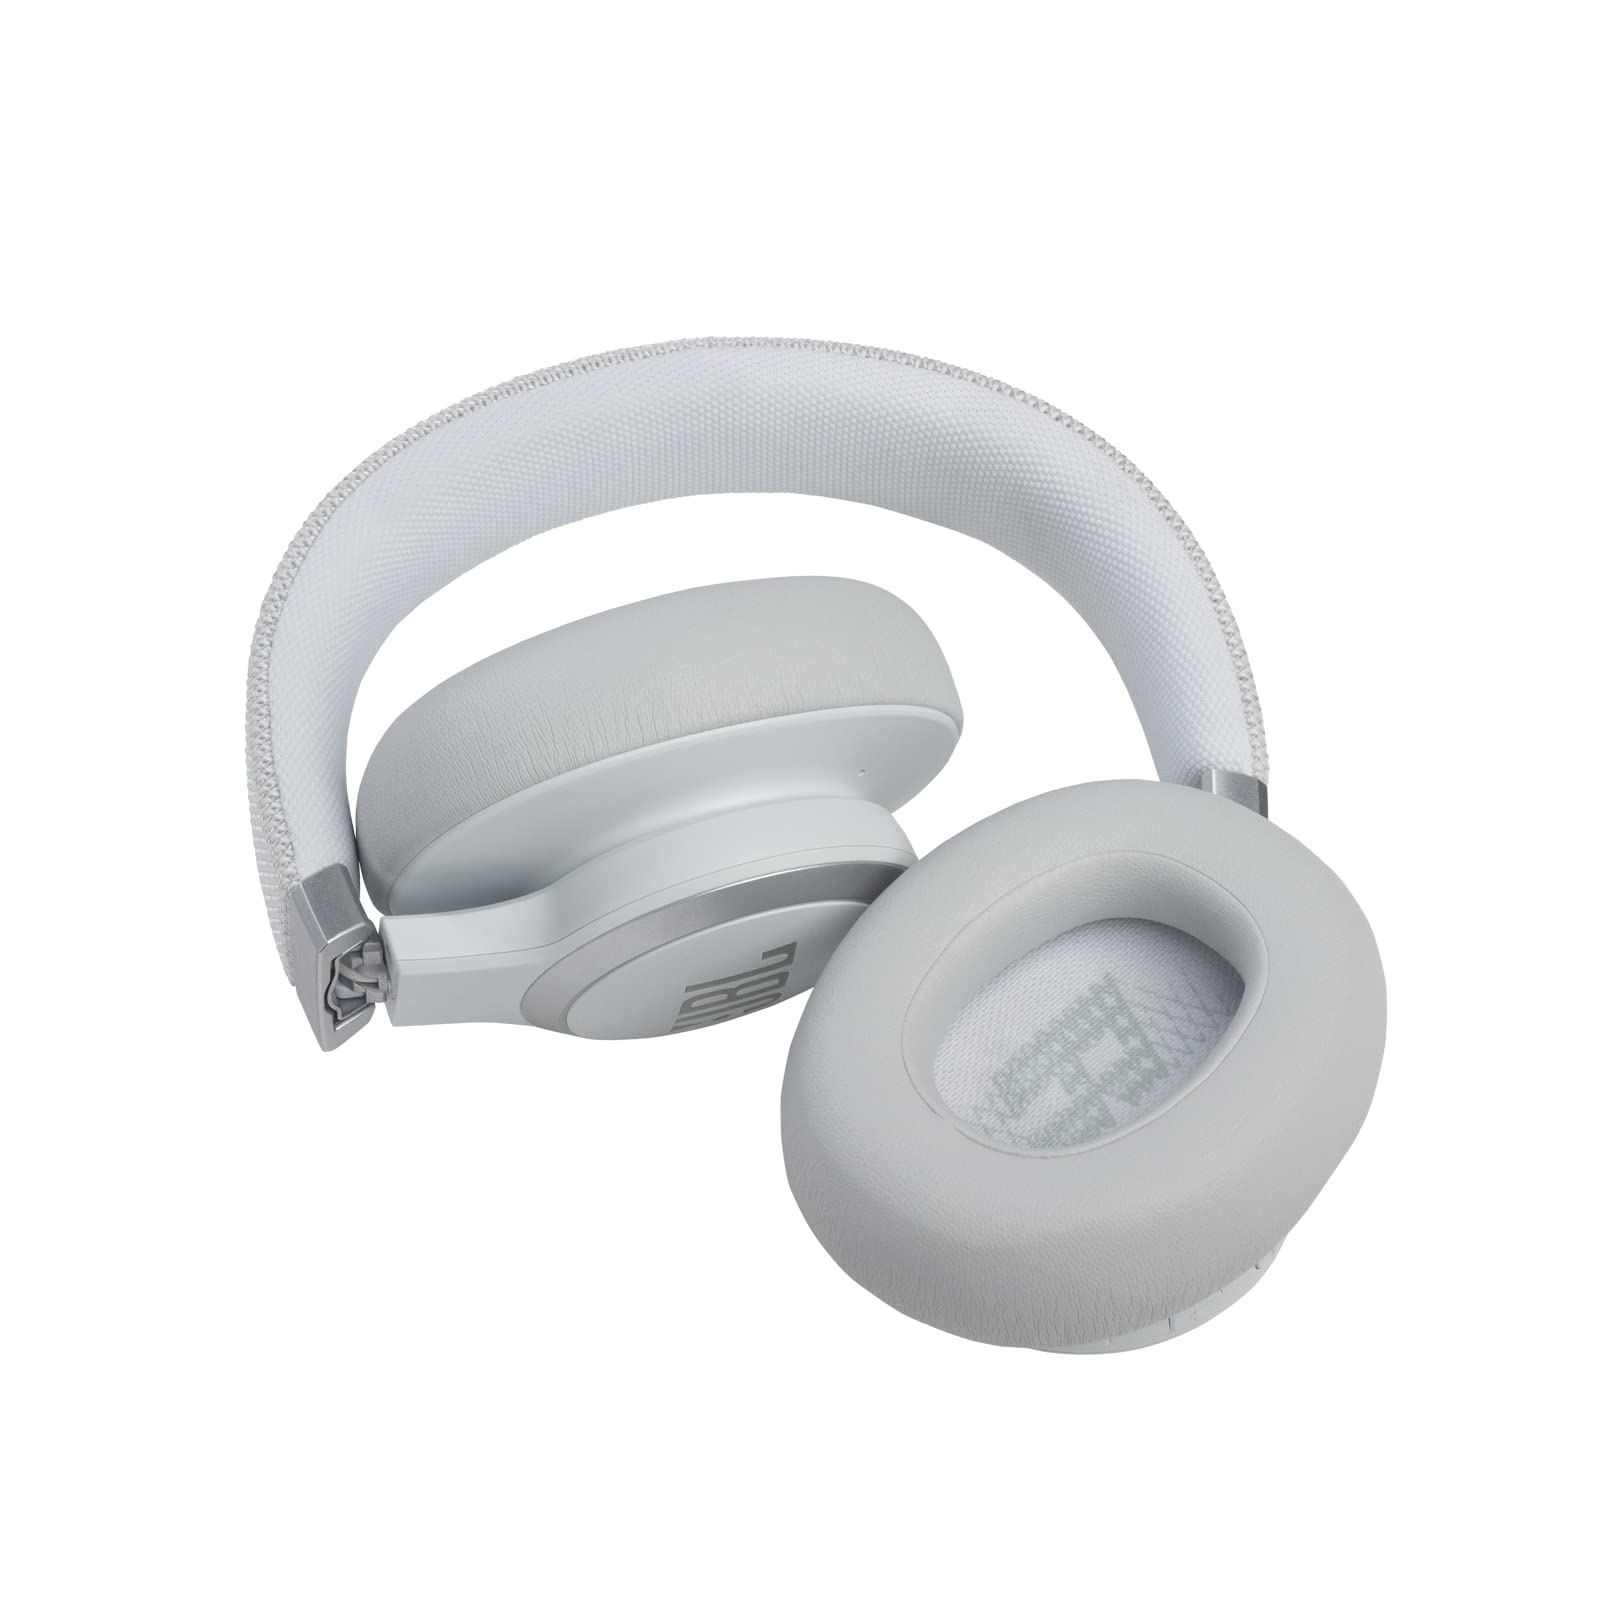 JBL Live 660NC Wireless Over Ear Noise Cancelling Headphones, Powerful JBL Signature Sound, ANC + Ambient Aware, Voice Assistant, 50H Battery